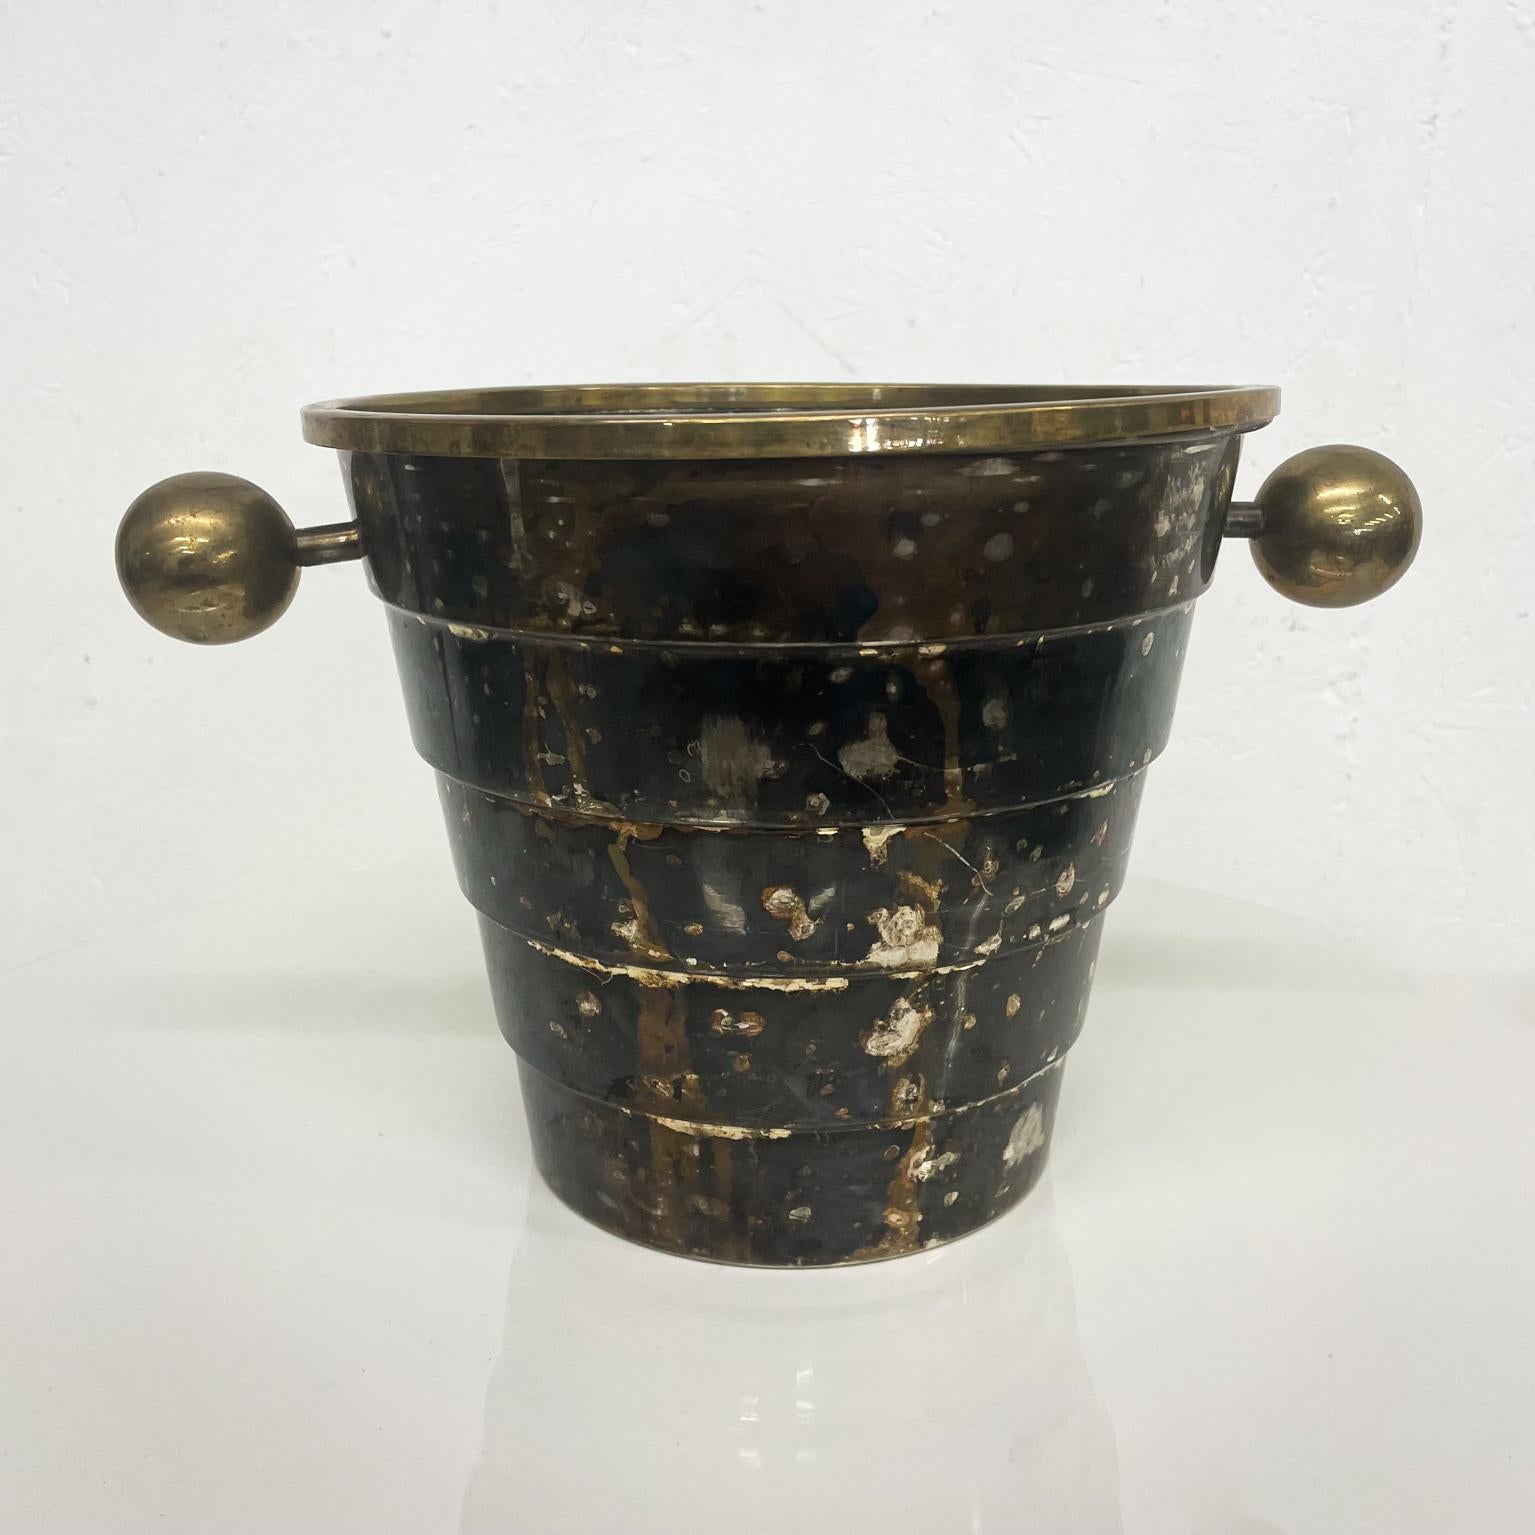 Ice bucket
Fabulous Vintage Larry Laslo for Towle Champagne Ice Bucket, Italy 1970s
Clean modern Memphis lines in brass and silverplate.
Maker stamp.
8.38 h x 9.38 diameter 13.75 w
Designed by Larry Laslo for Towle made in Italy 1970s
Preowned